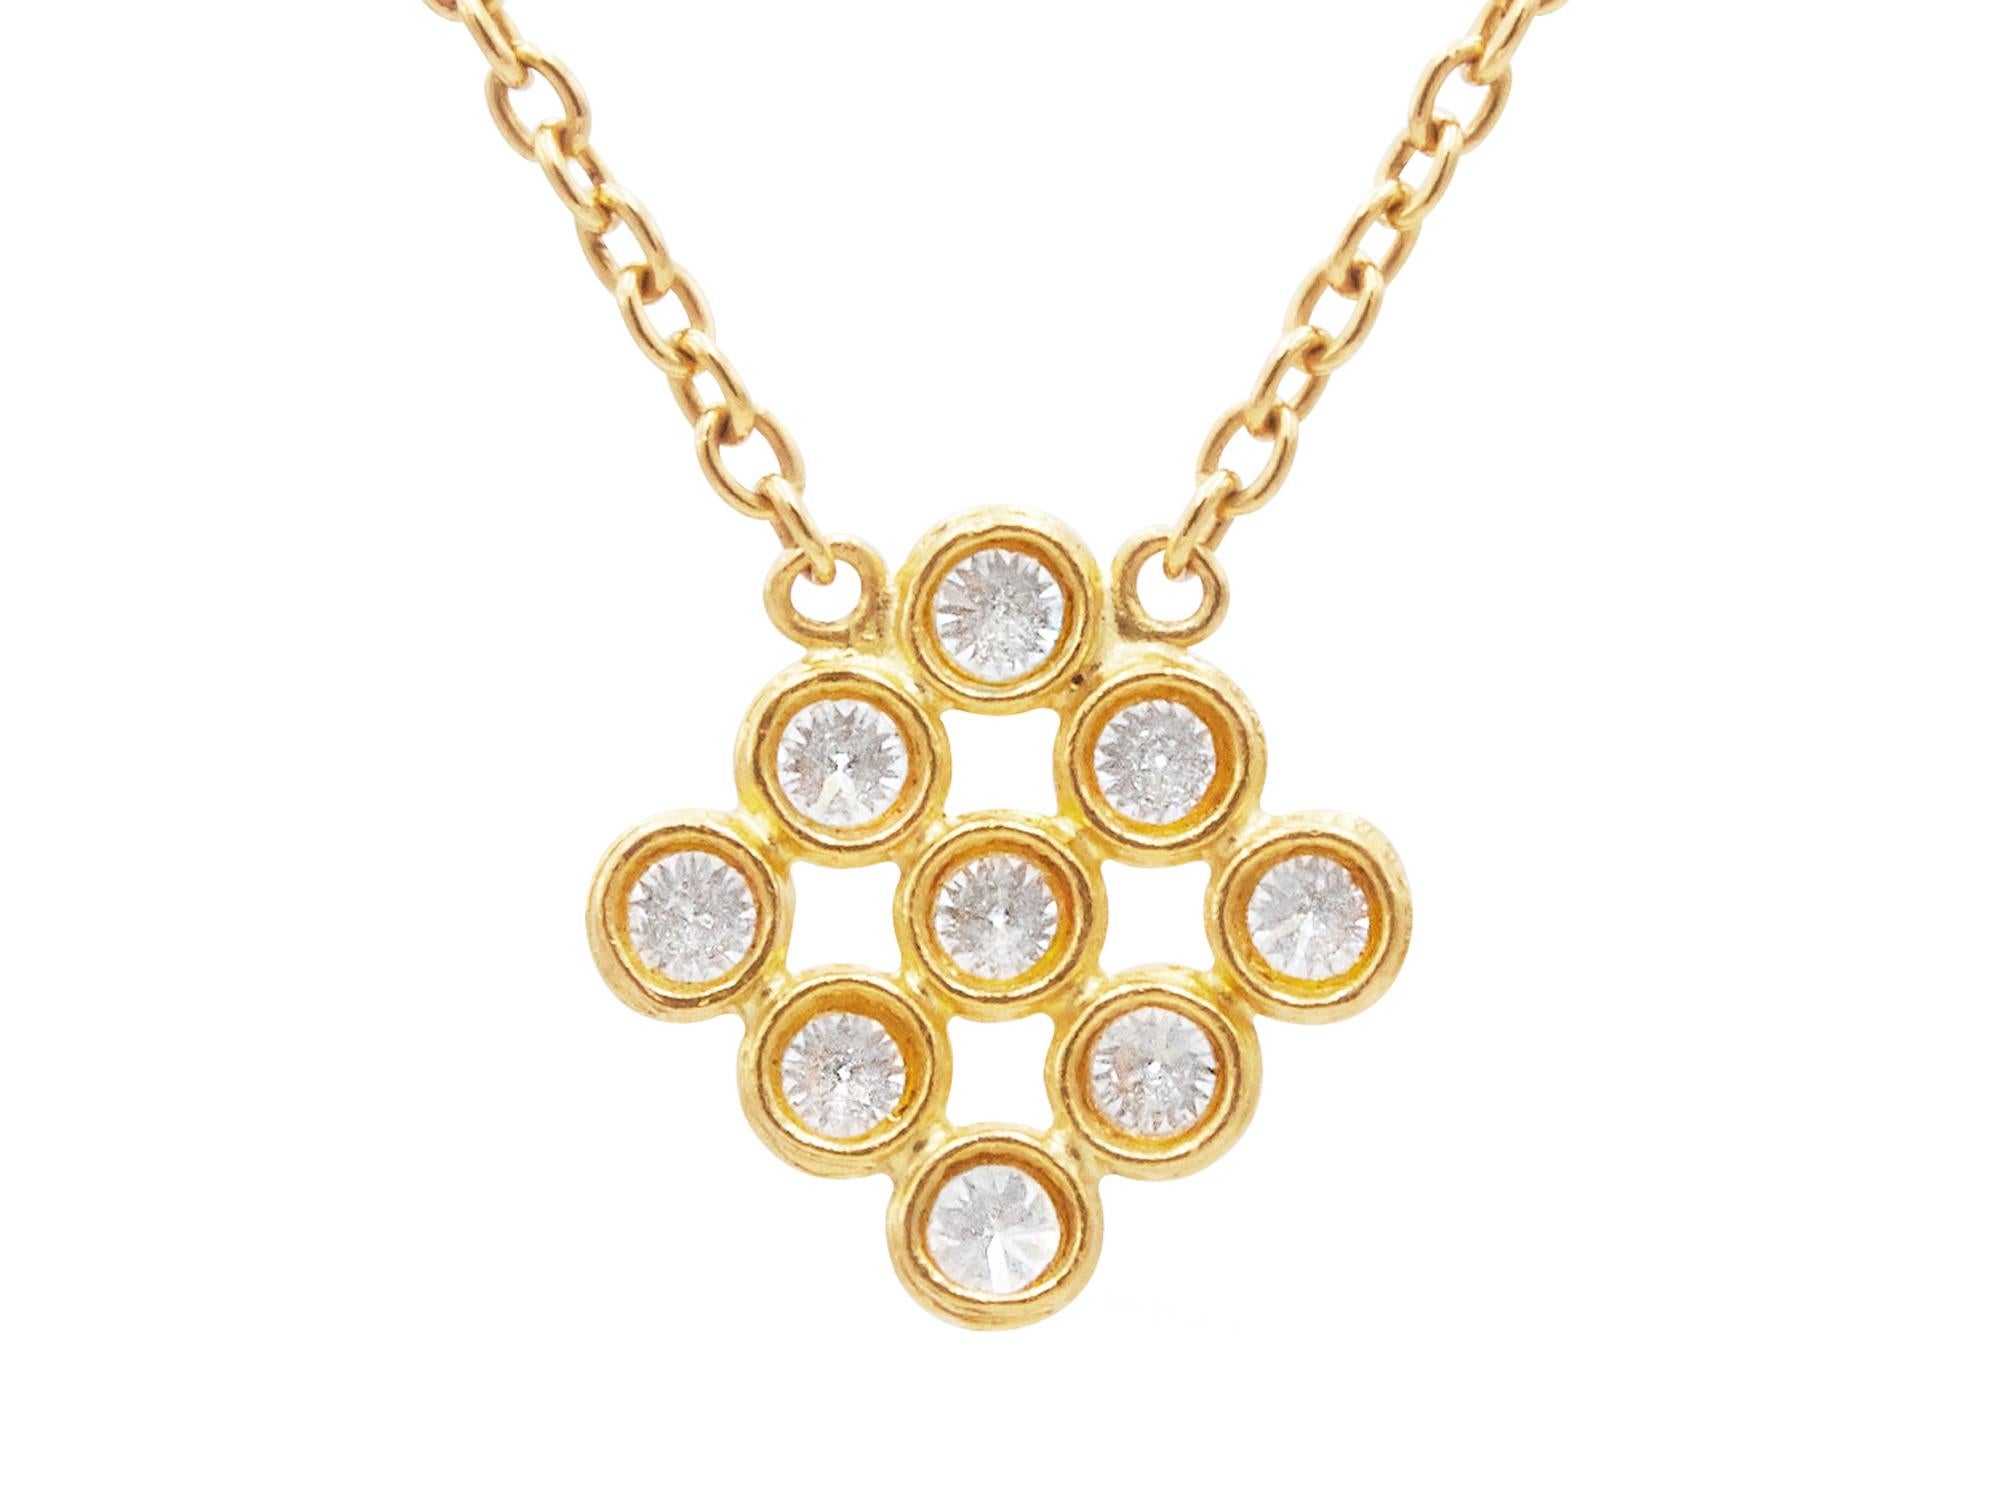 Contemporary Gurhan 24 Karat Hammered Yellow Gold and White Diamond Cluster Pendant Necklace For Sale